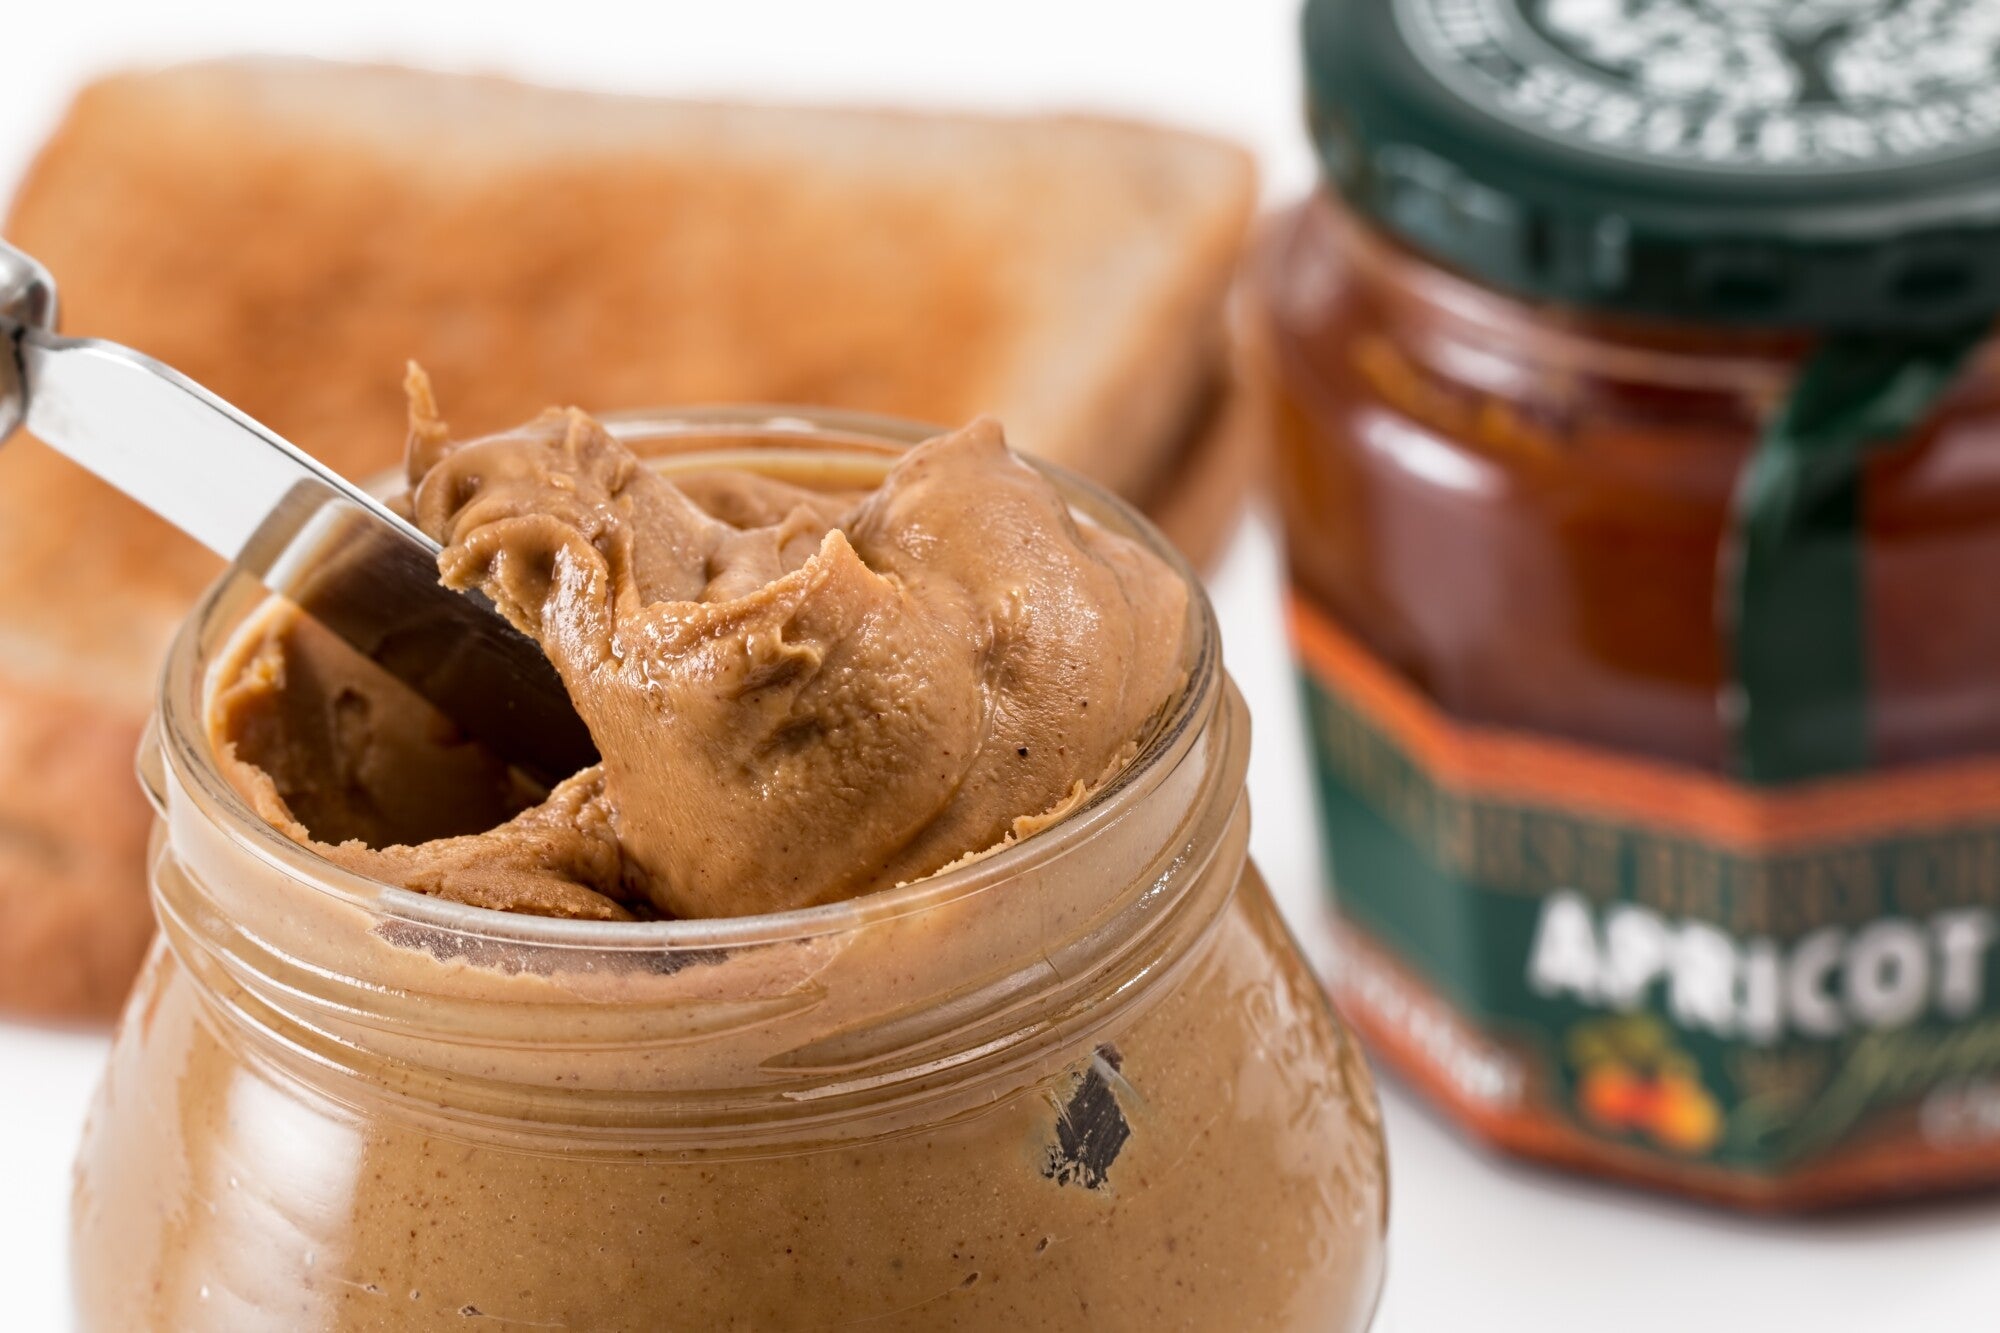 Is Peanut Butter Keto? Why You Should Try All Natural Peanut Butter